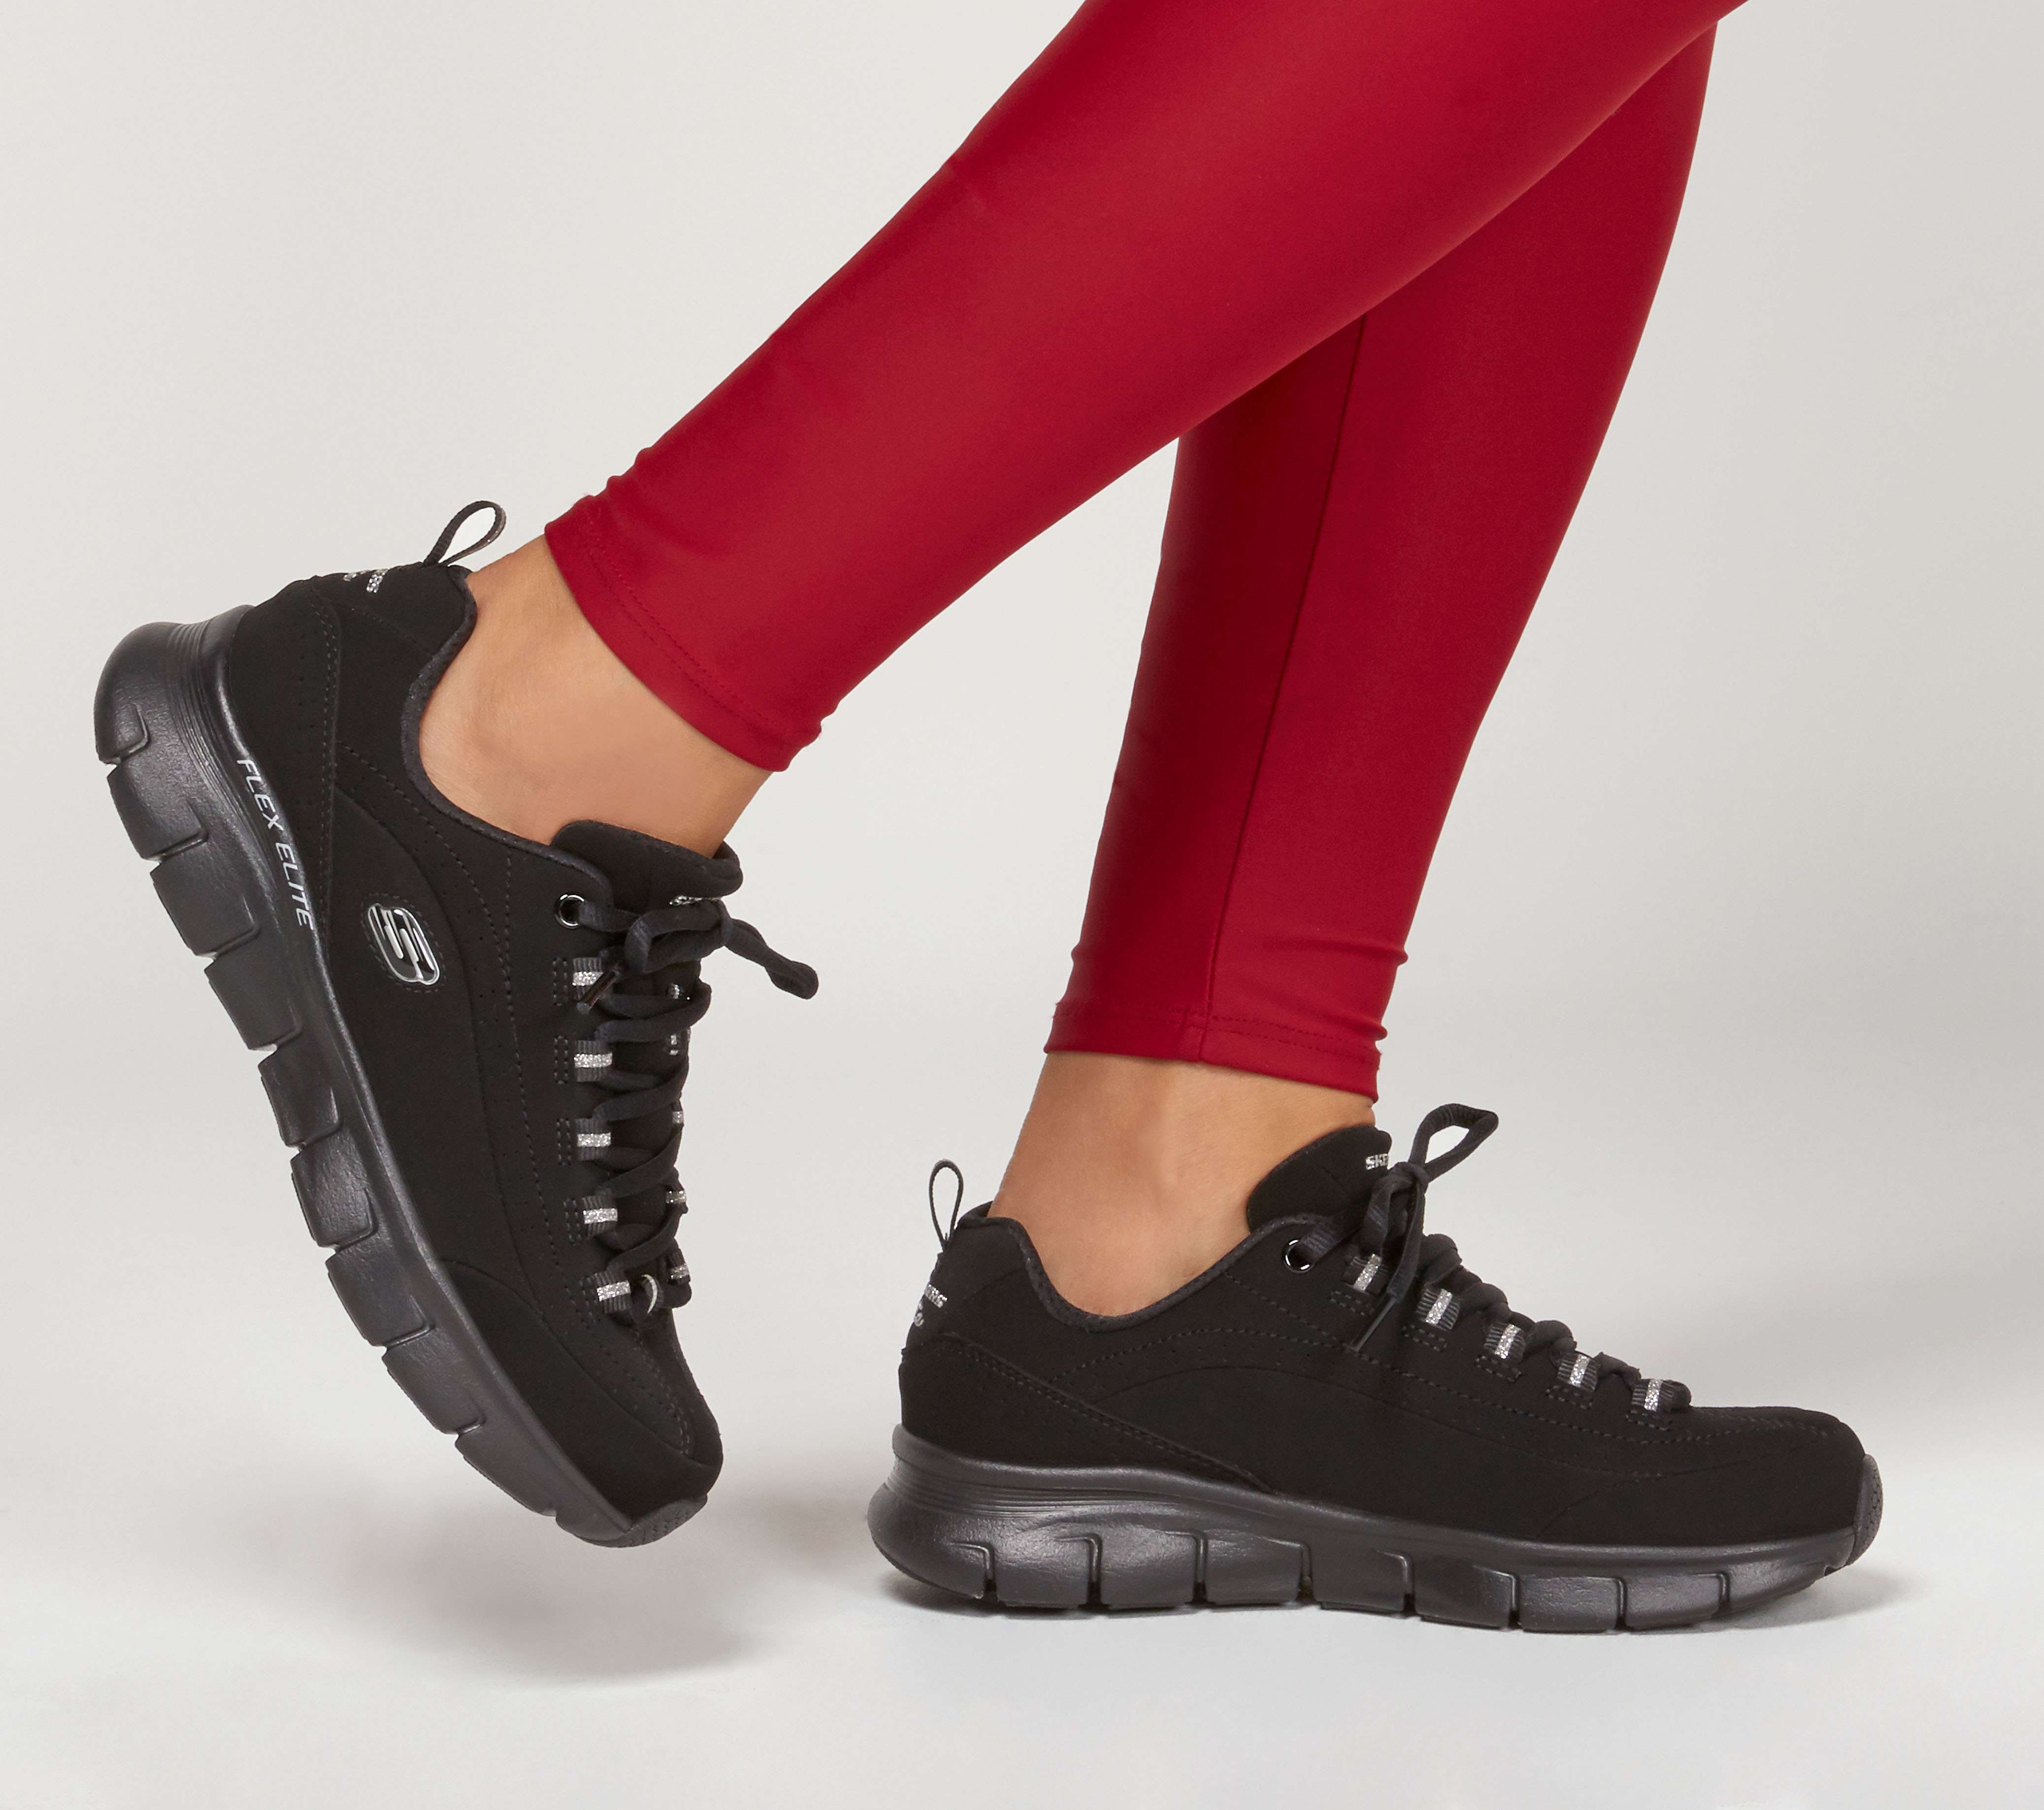 skechers synergy 3.0 out & about women's sneakers